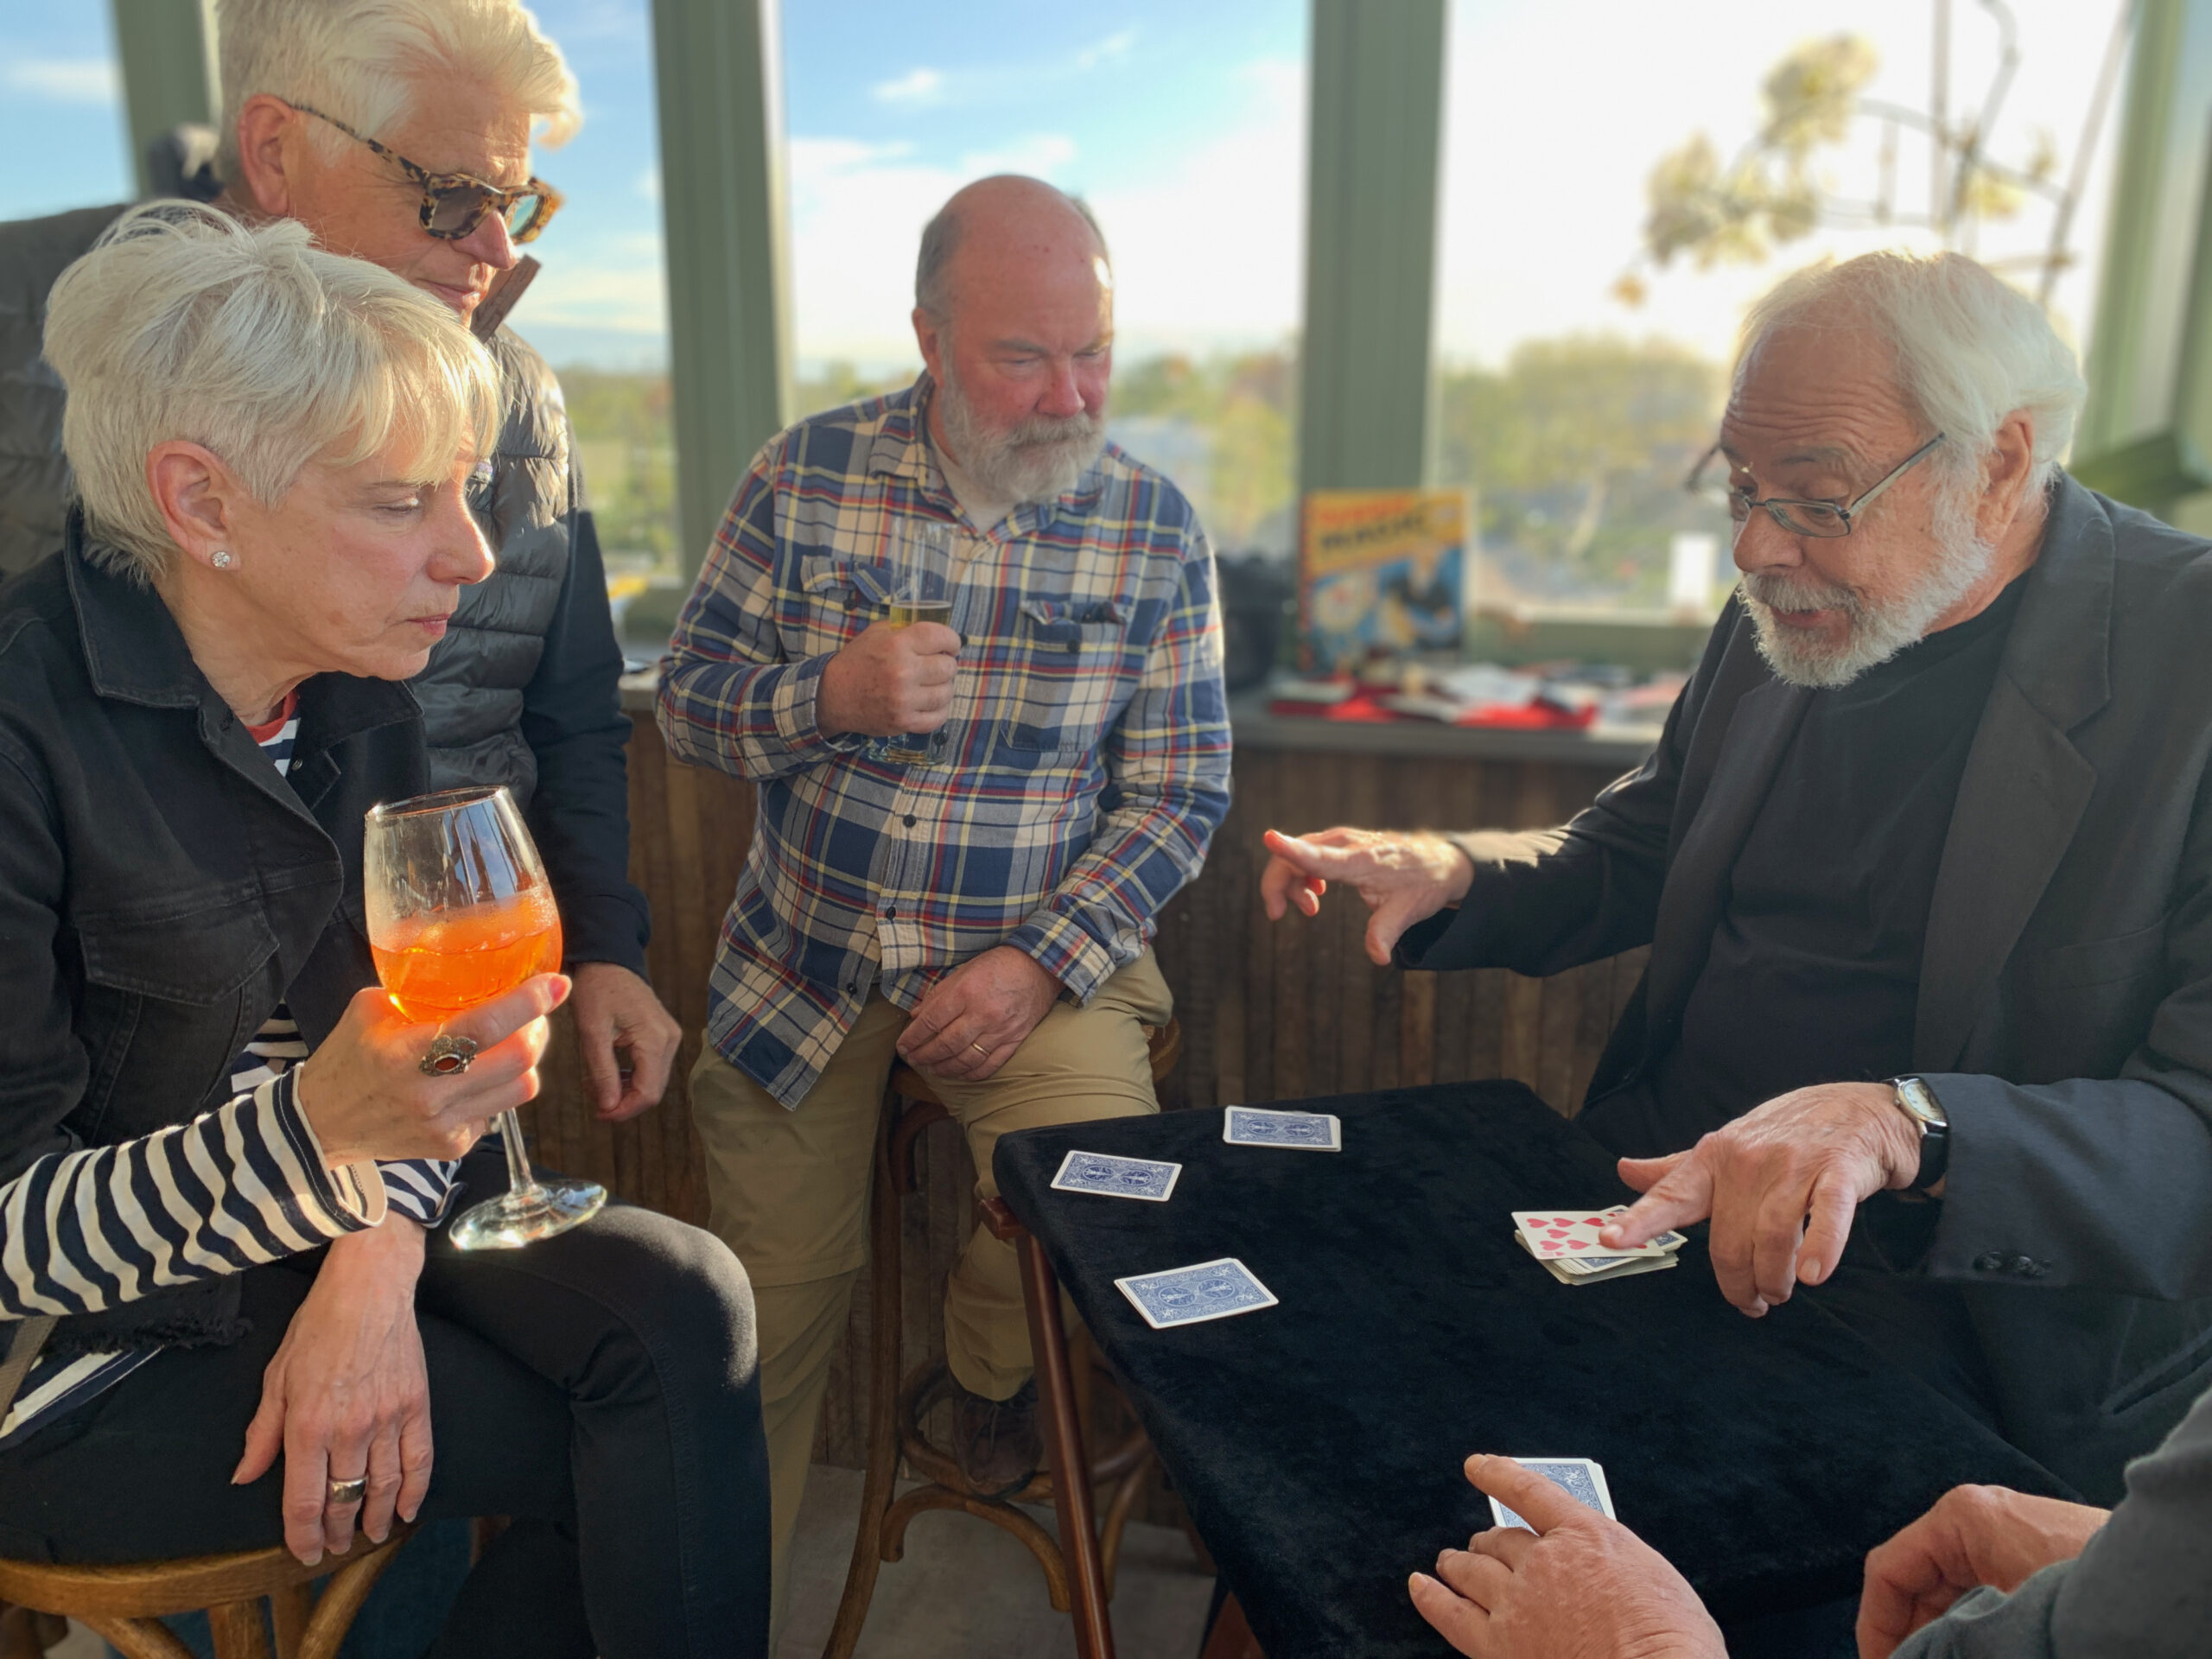 Magician Allan Kronzek stumps the crowd with his card tricks on a recent Tuesday at The Green Room bar of the Sag Harbor Cinema. ANNETTE HINKLE